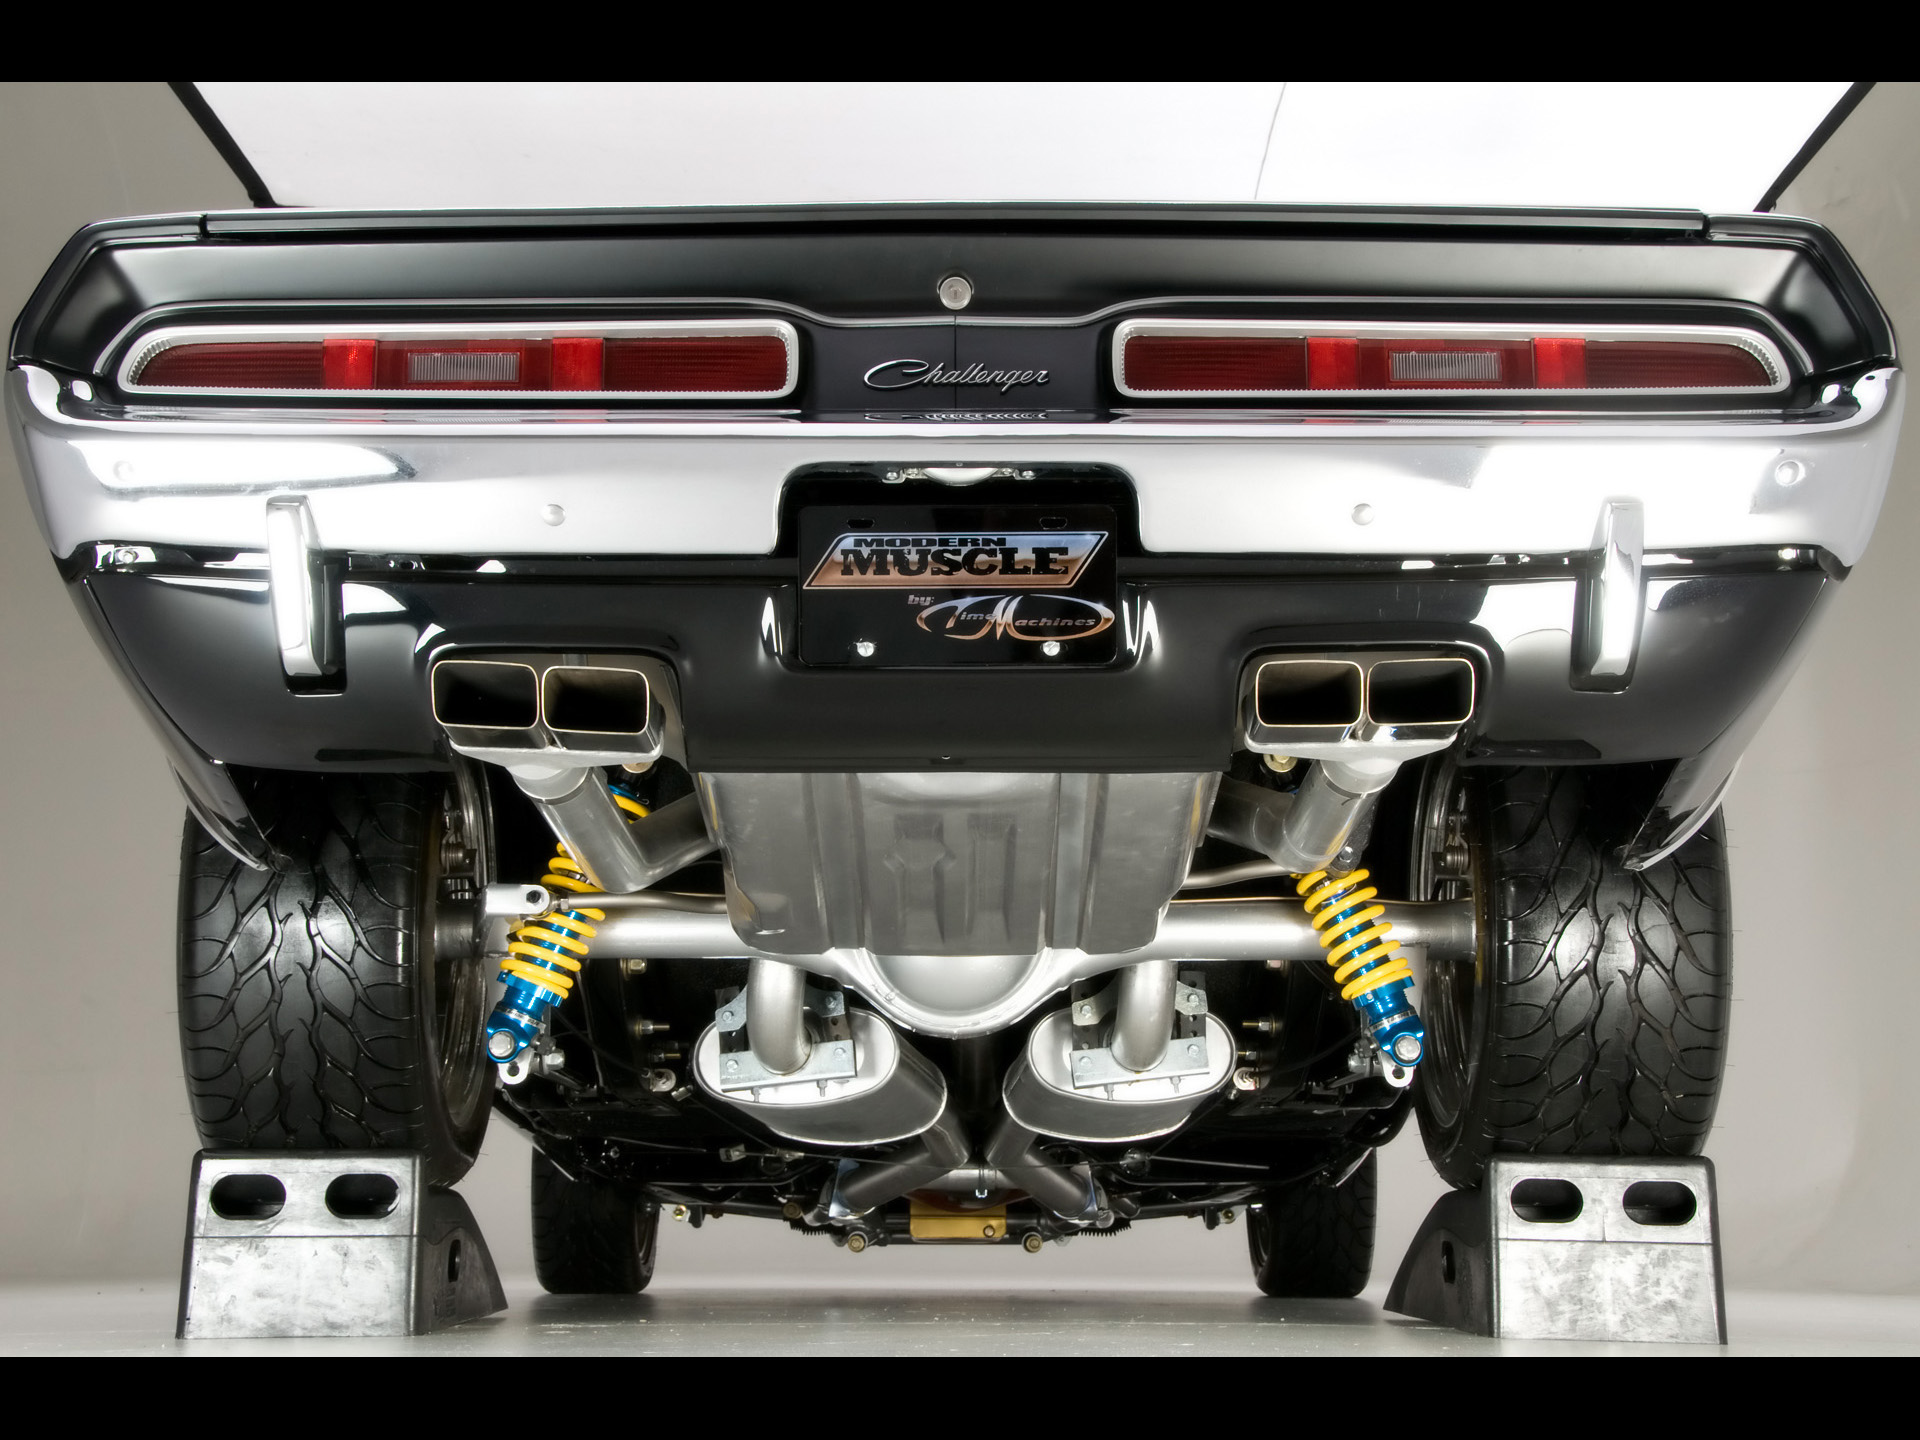 1971-Dodge-Challenger-RT-Muscle-Car-By-Modern-Muscle-Undercarriage-1920x1440